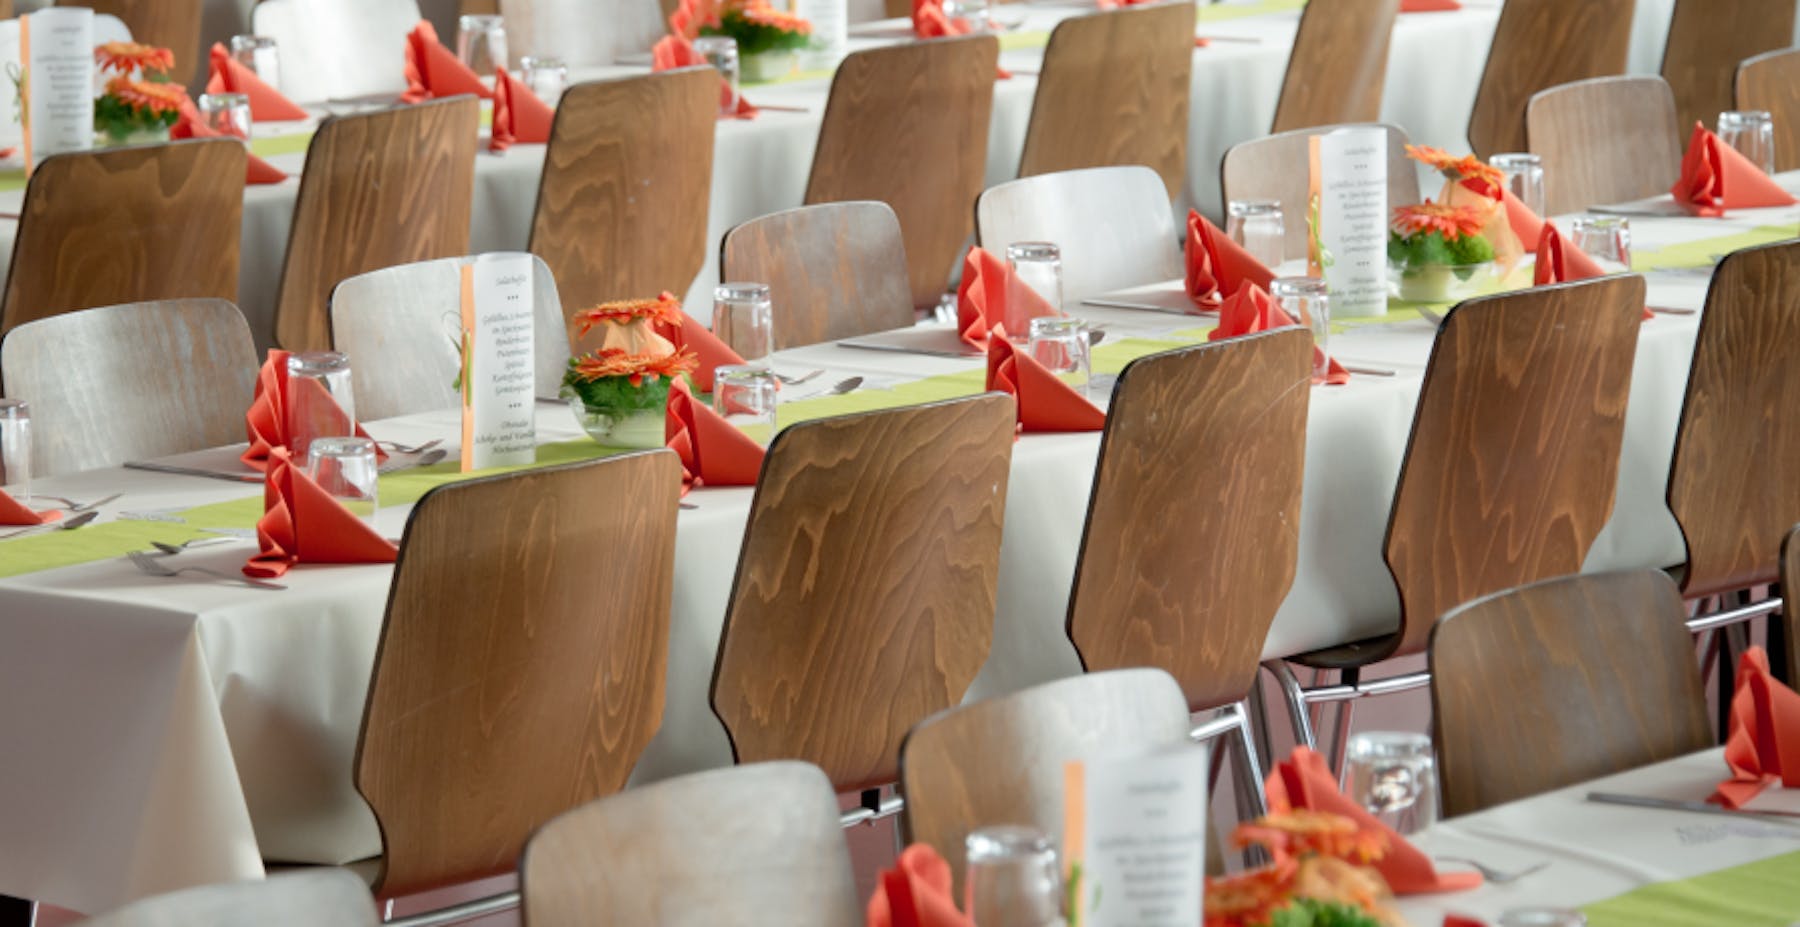 decorated tables with chairs